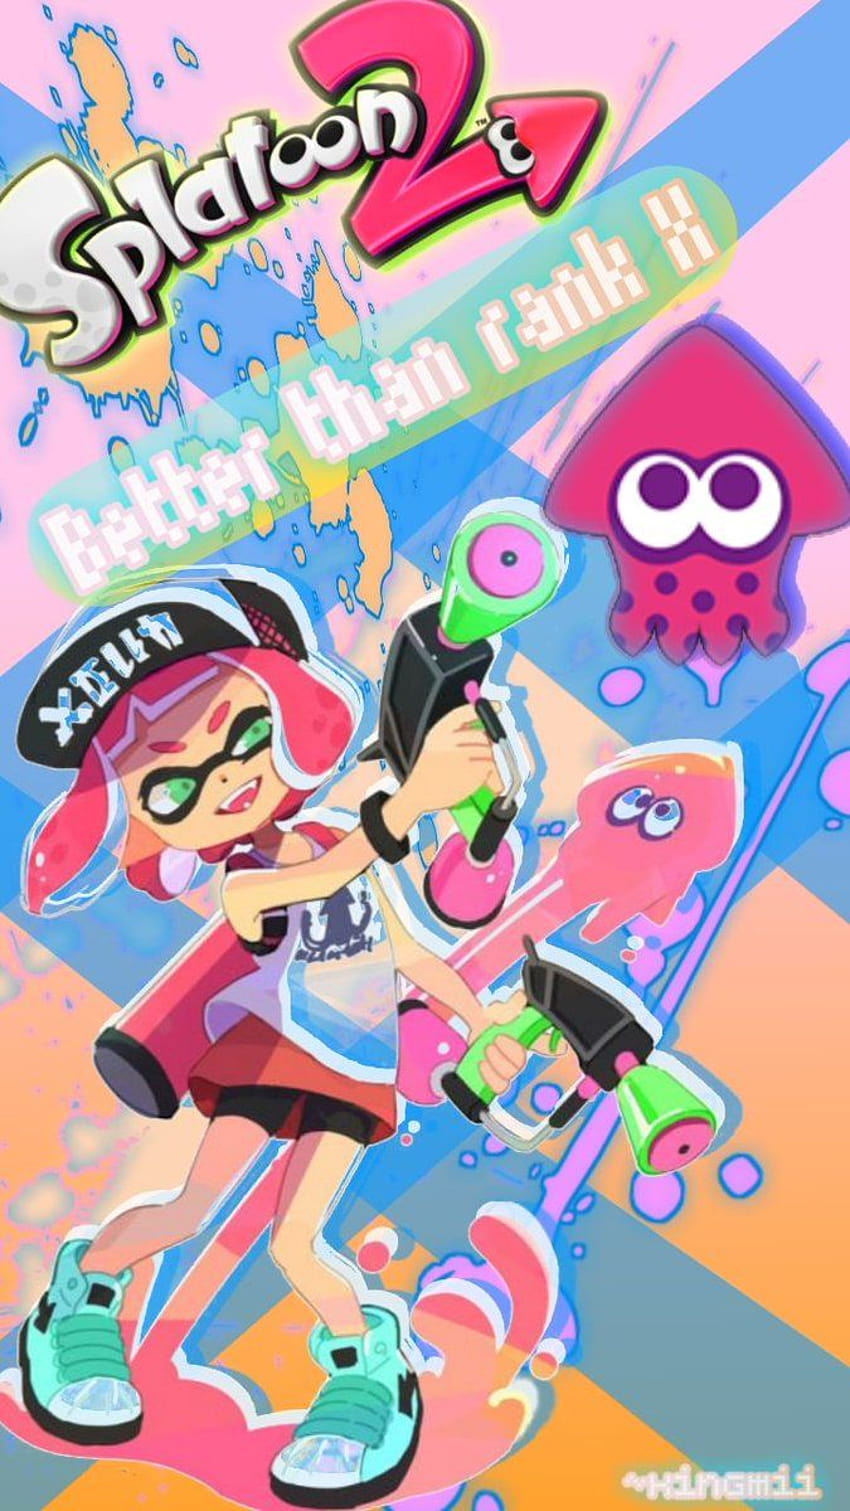 Igor  on Twitter i also made these two splatoon phone wallpapers for my  squidocto followers  also here if twitter compress them badly  httpstcoDFOn2jUqGa httpstcorlpH1tk3IP  X